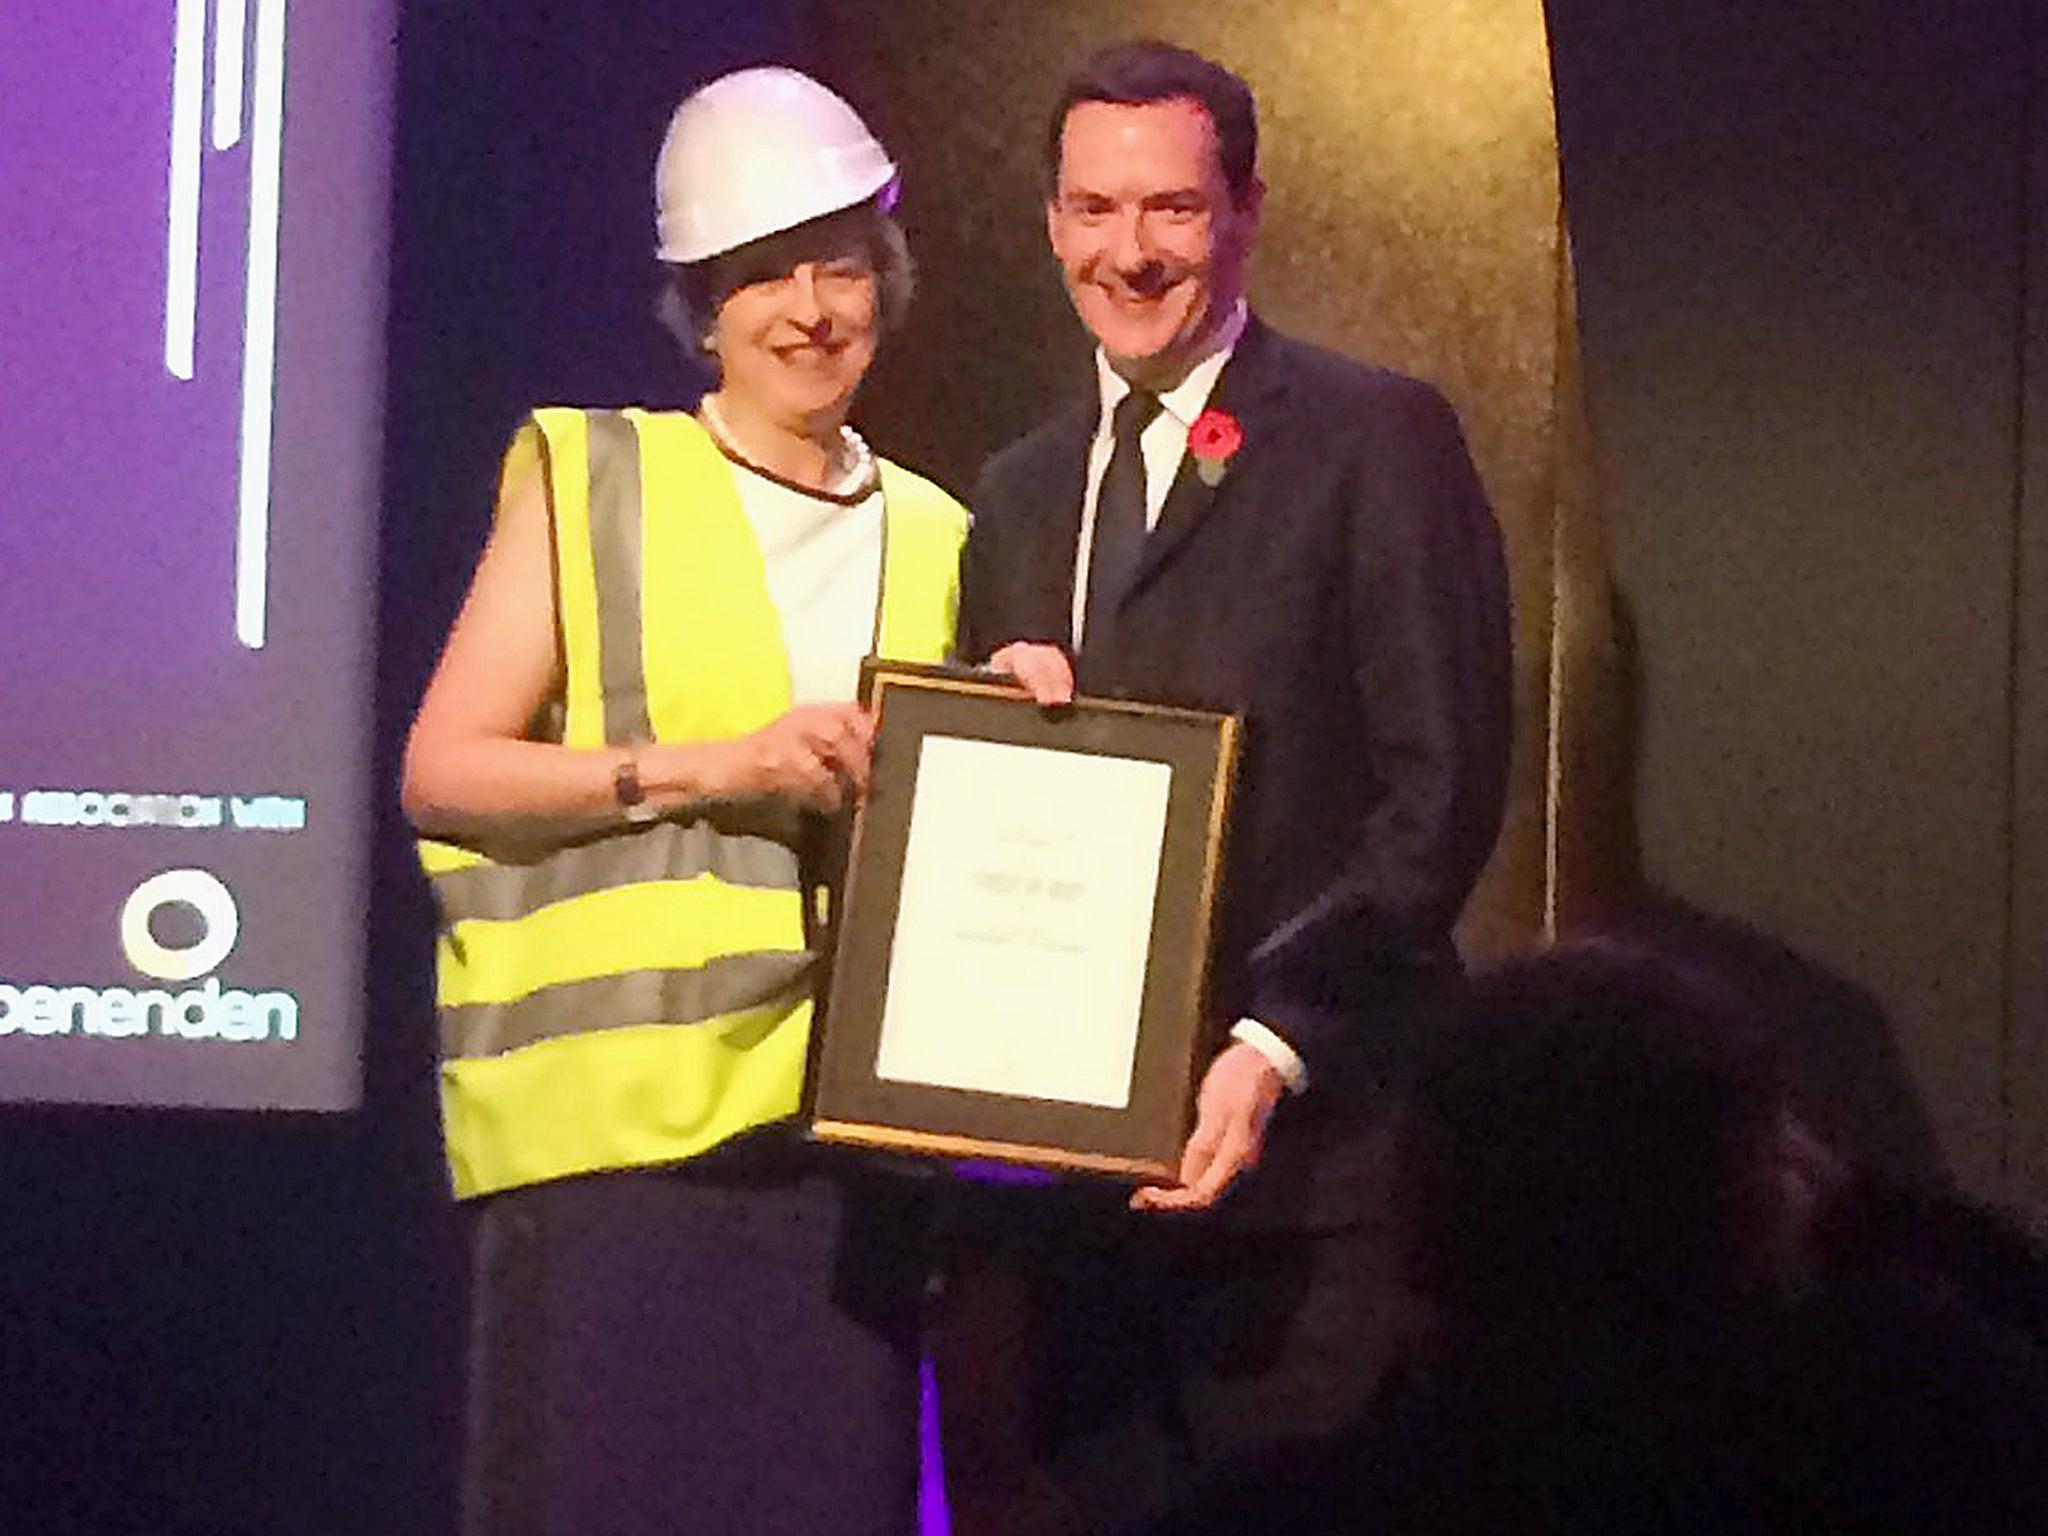 Prime Minister Theresa May who appeared to mock George Osborne by accepting an award from the former chancellor wearing a high-visibility jacket and hard hat